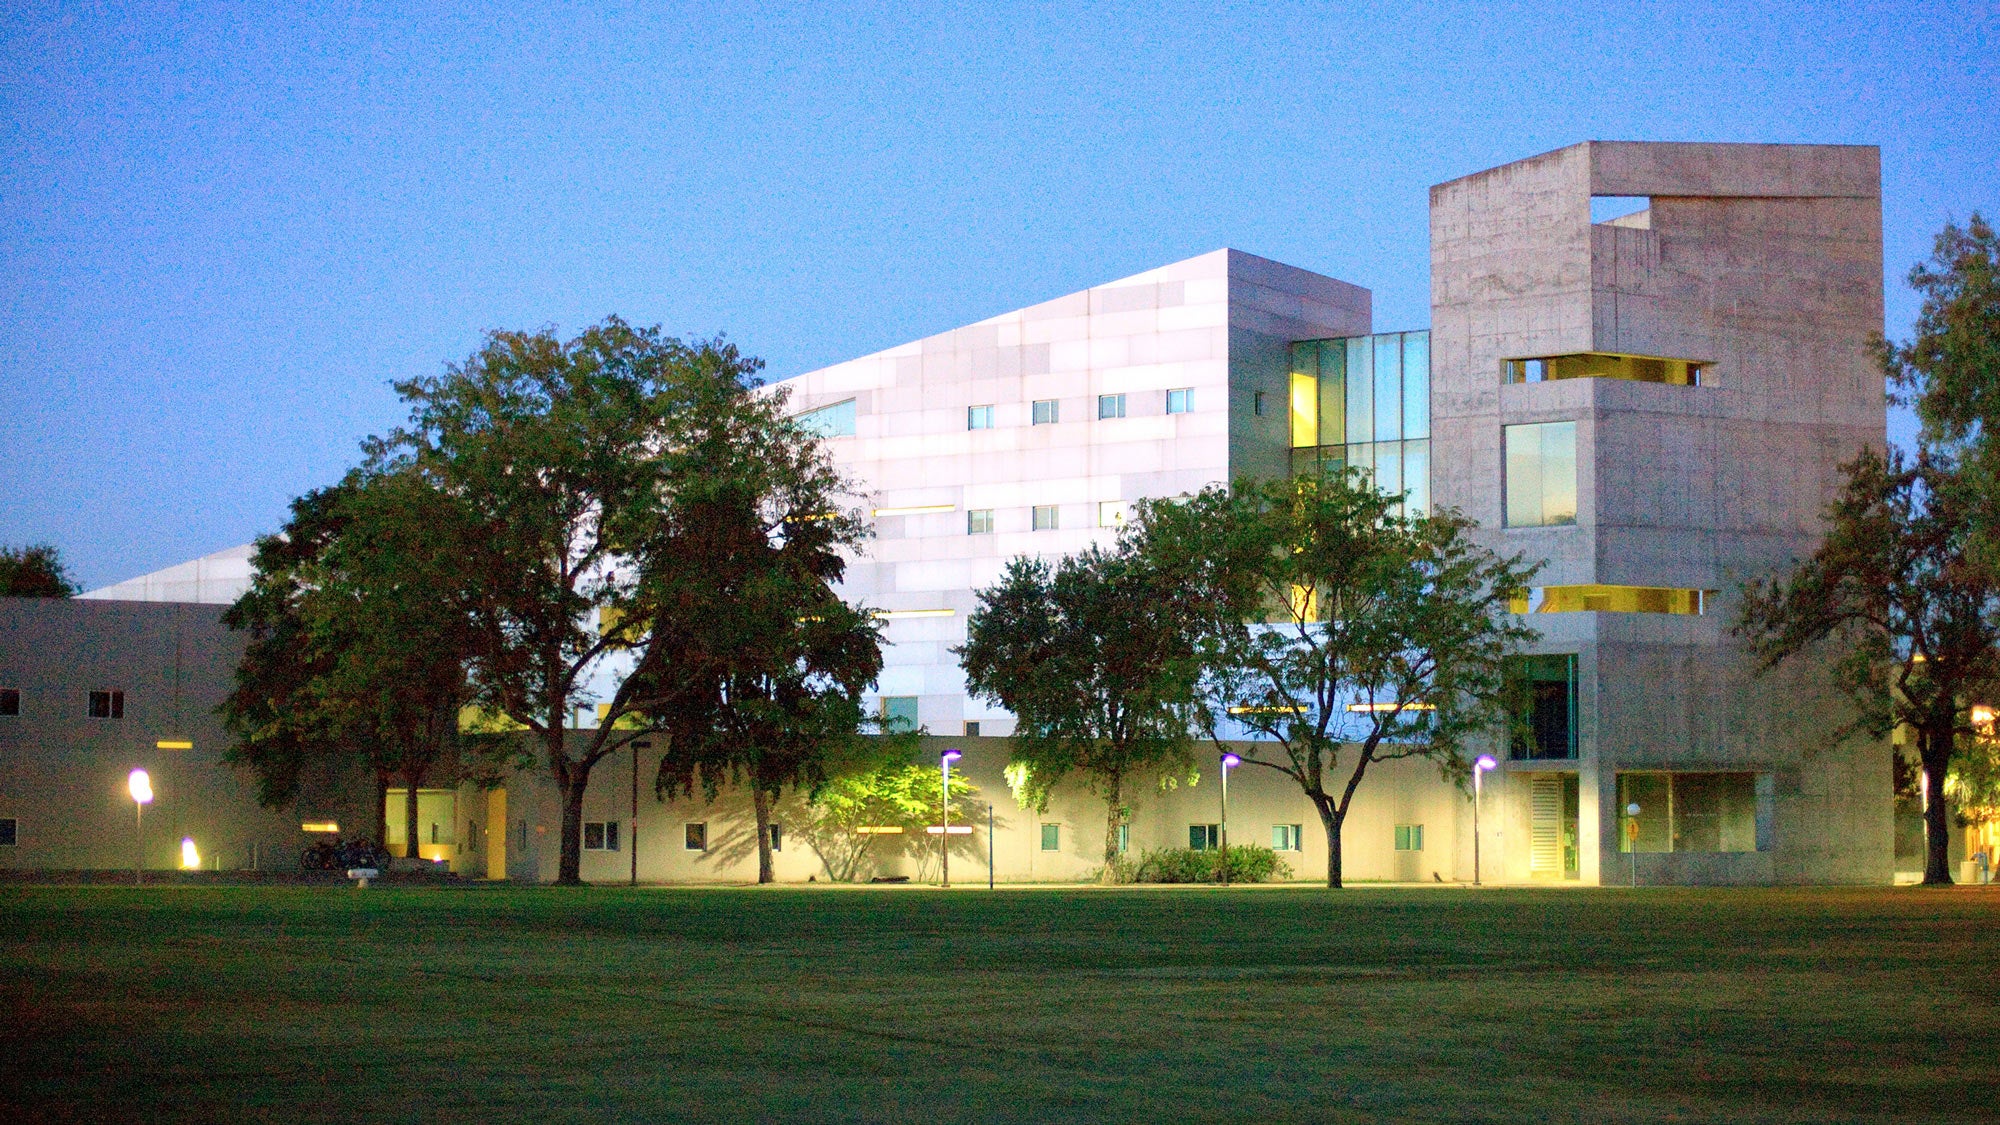 Social Sciences and Humanities Building, exterior